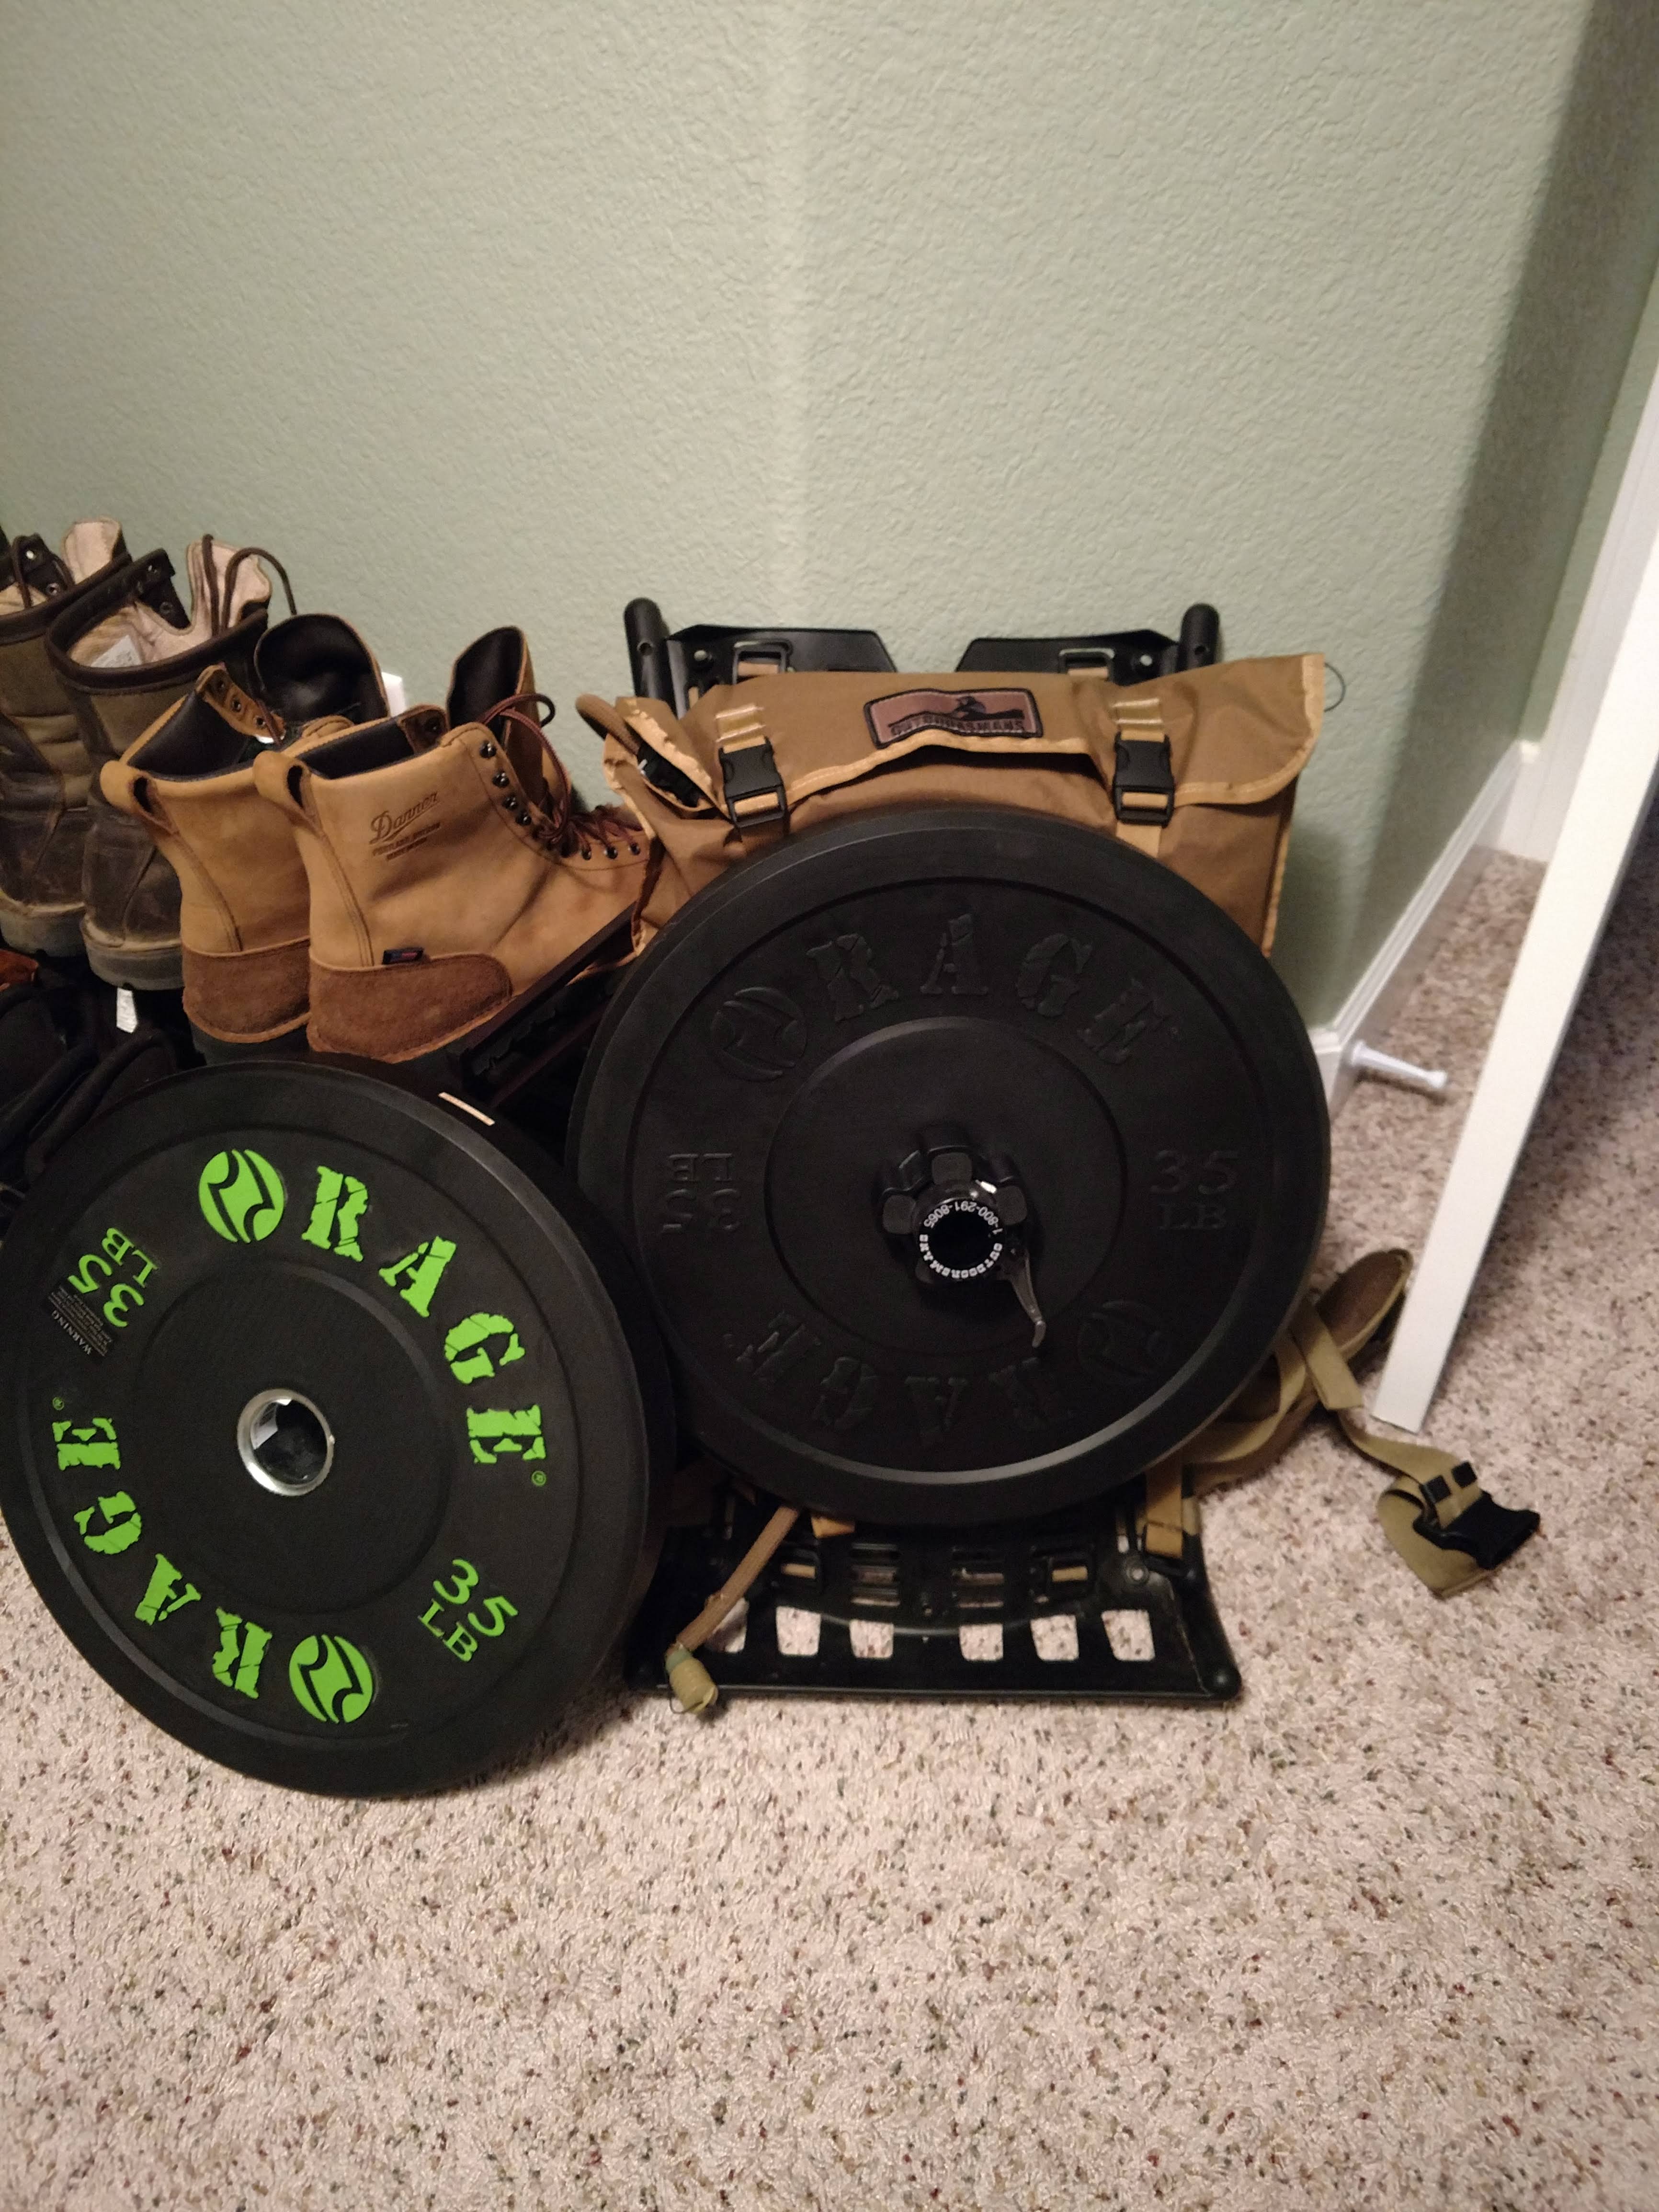 The Outdoorsmans Atlas Trainer can hold one Olympic bumper plate or two steel plates.